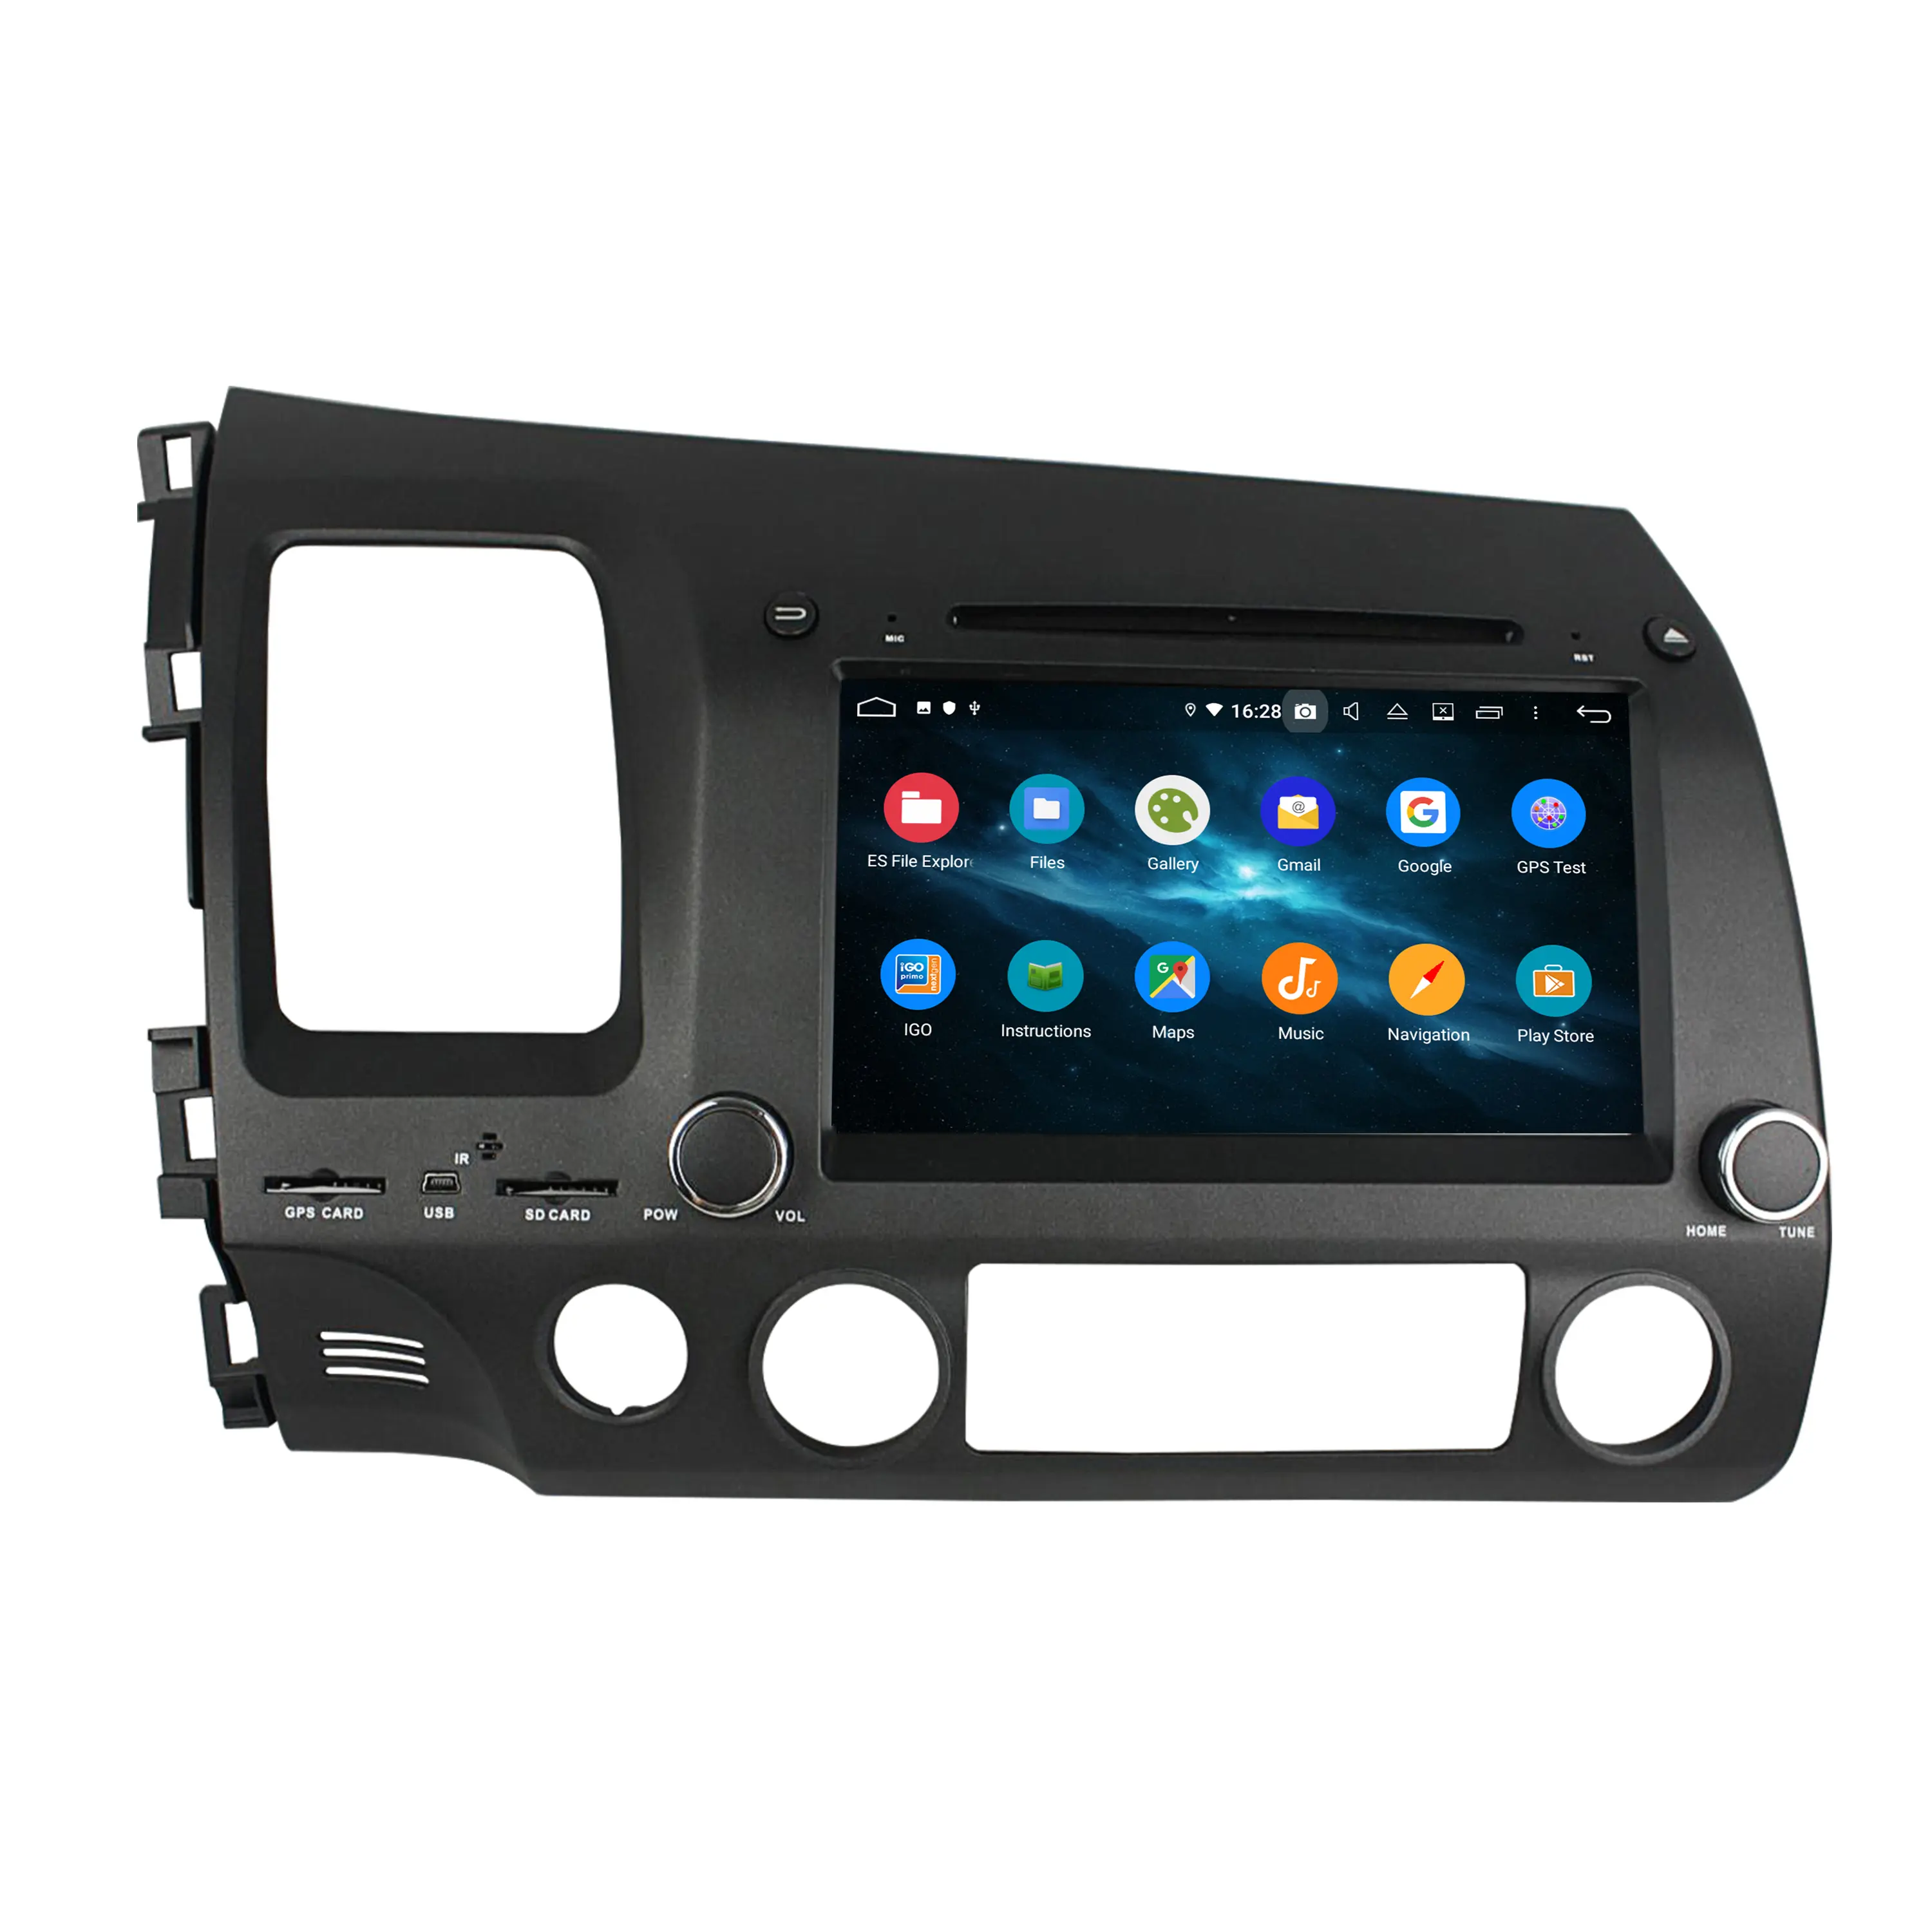 KLYDE KD-8030 PX5 DVD Car Player 4G+64G Android 10.0 Car Radio GPS 8 inch For CIVIC 2006 2007 2008 2009 2010 2011(LHD)